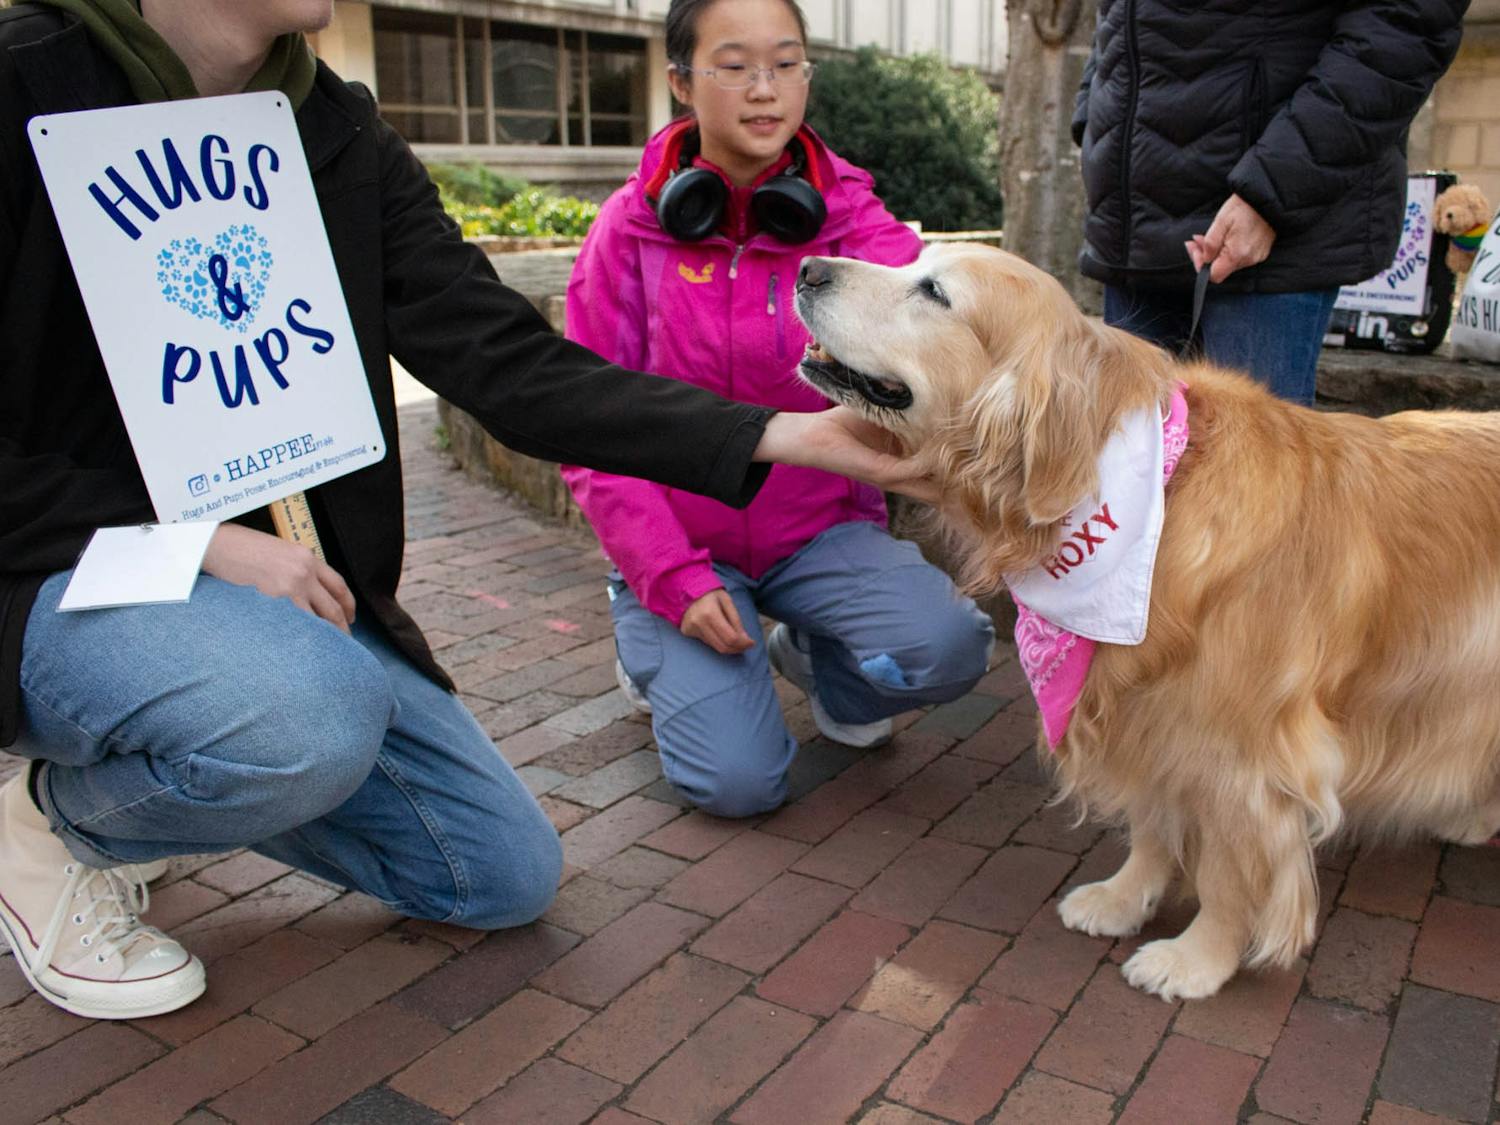 UNC first-years AJ Kinrade and Tianyun Zhao play with Roxy the Golden Retriever in Chapel Hill, N.C. on Monday, Jan. 16, 2023. Roxy visits campus with HAPPEE, an organization created to improve college students’ mental health by providing emotional support and outreach.